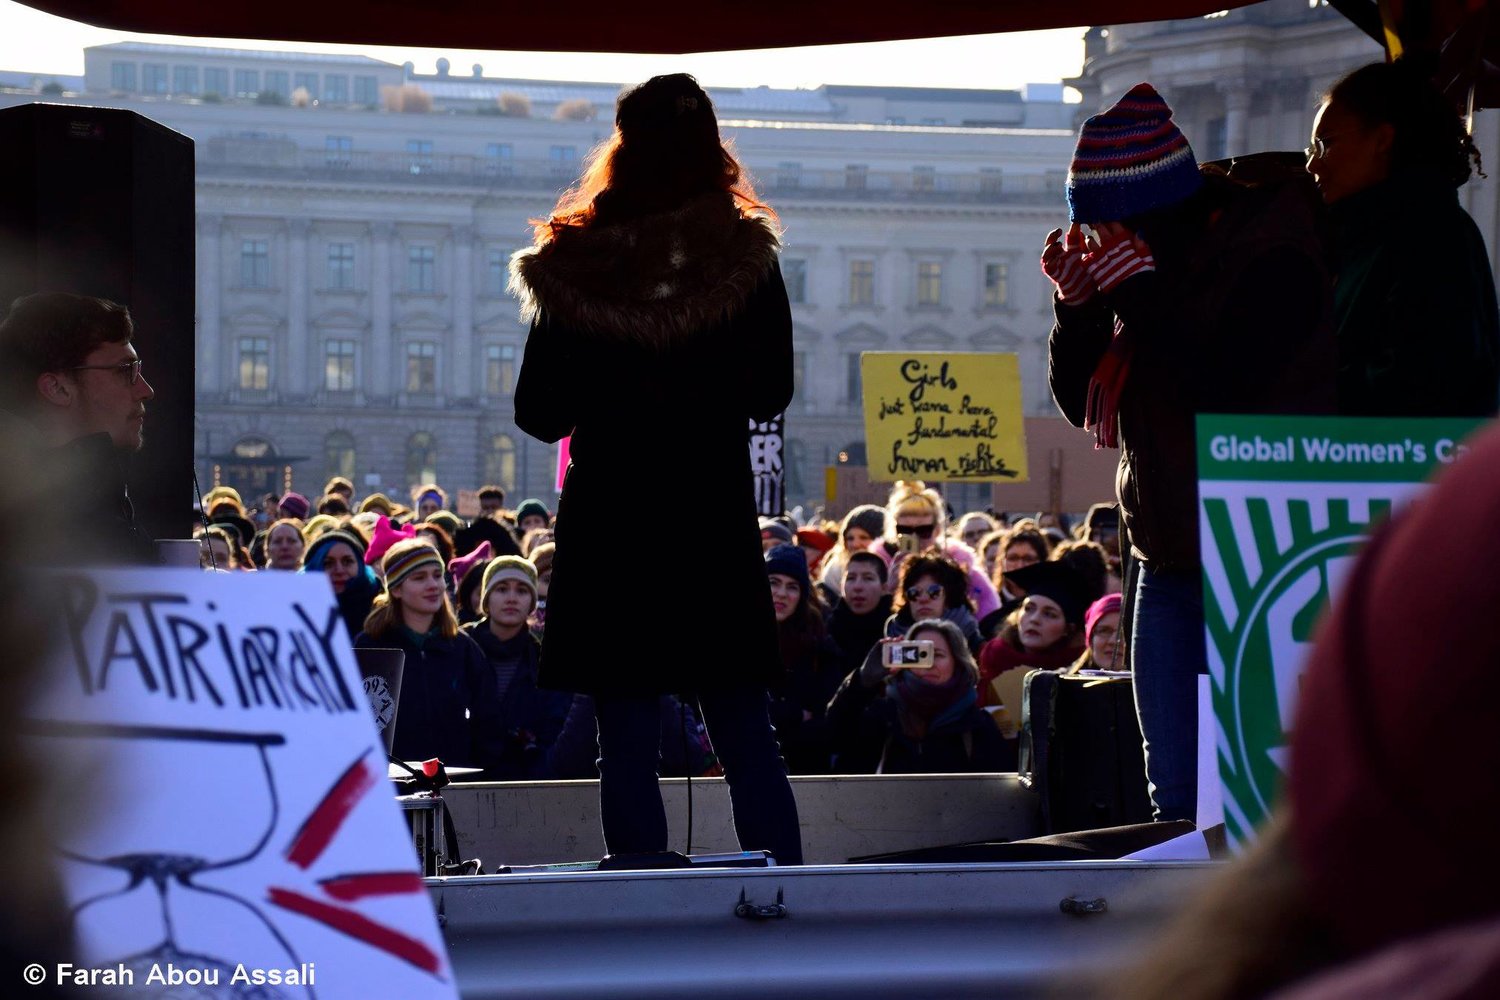 Our founder, Whitney Buchanan, at the Women’s March in Berlin speaking about fostering Christian-Muslim relations and supporting refugee women.